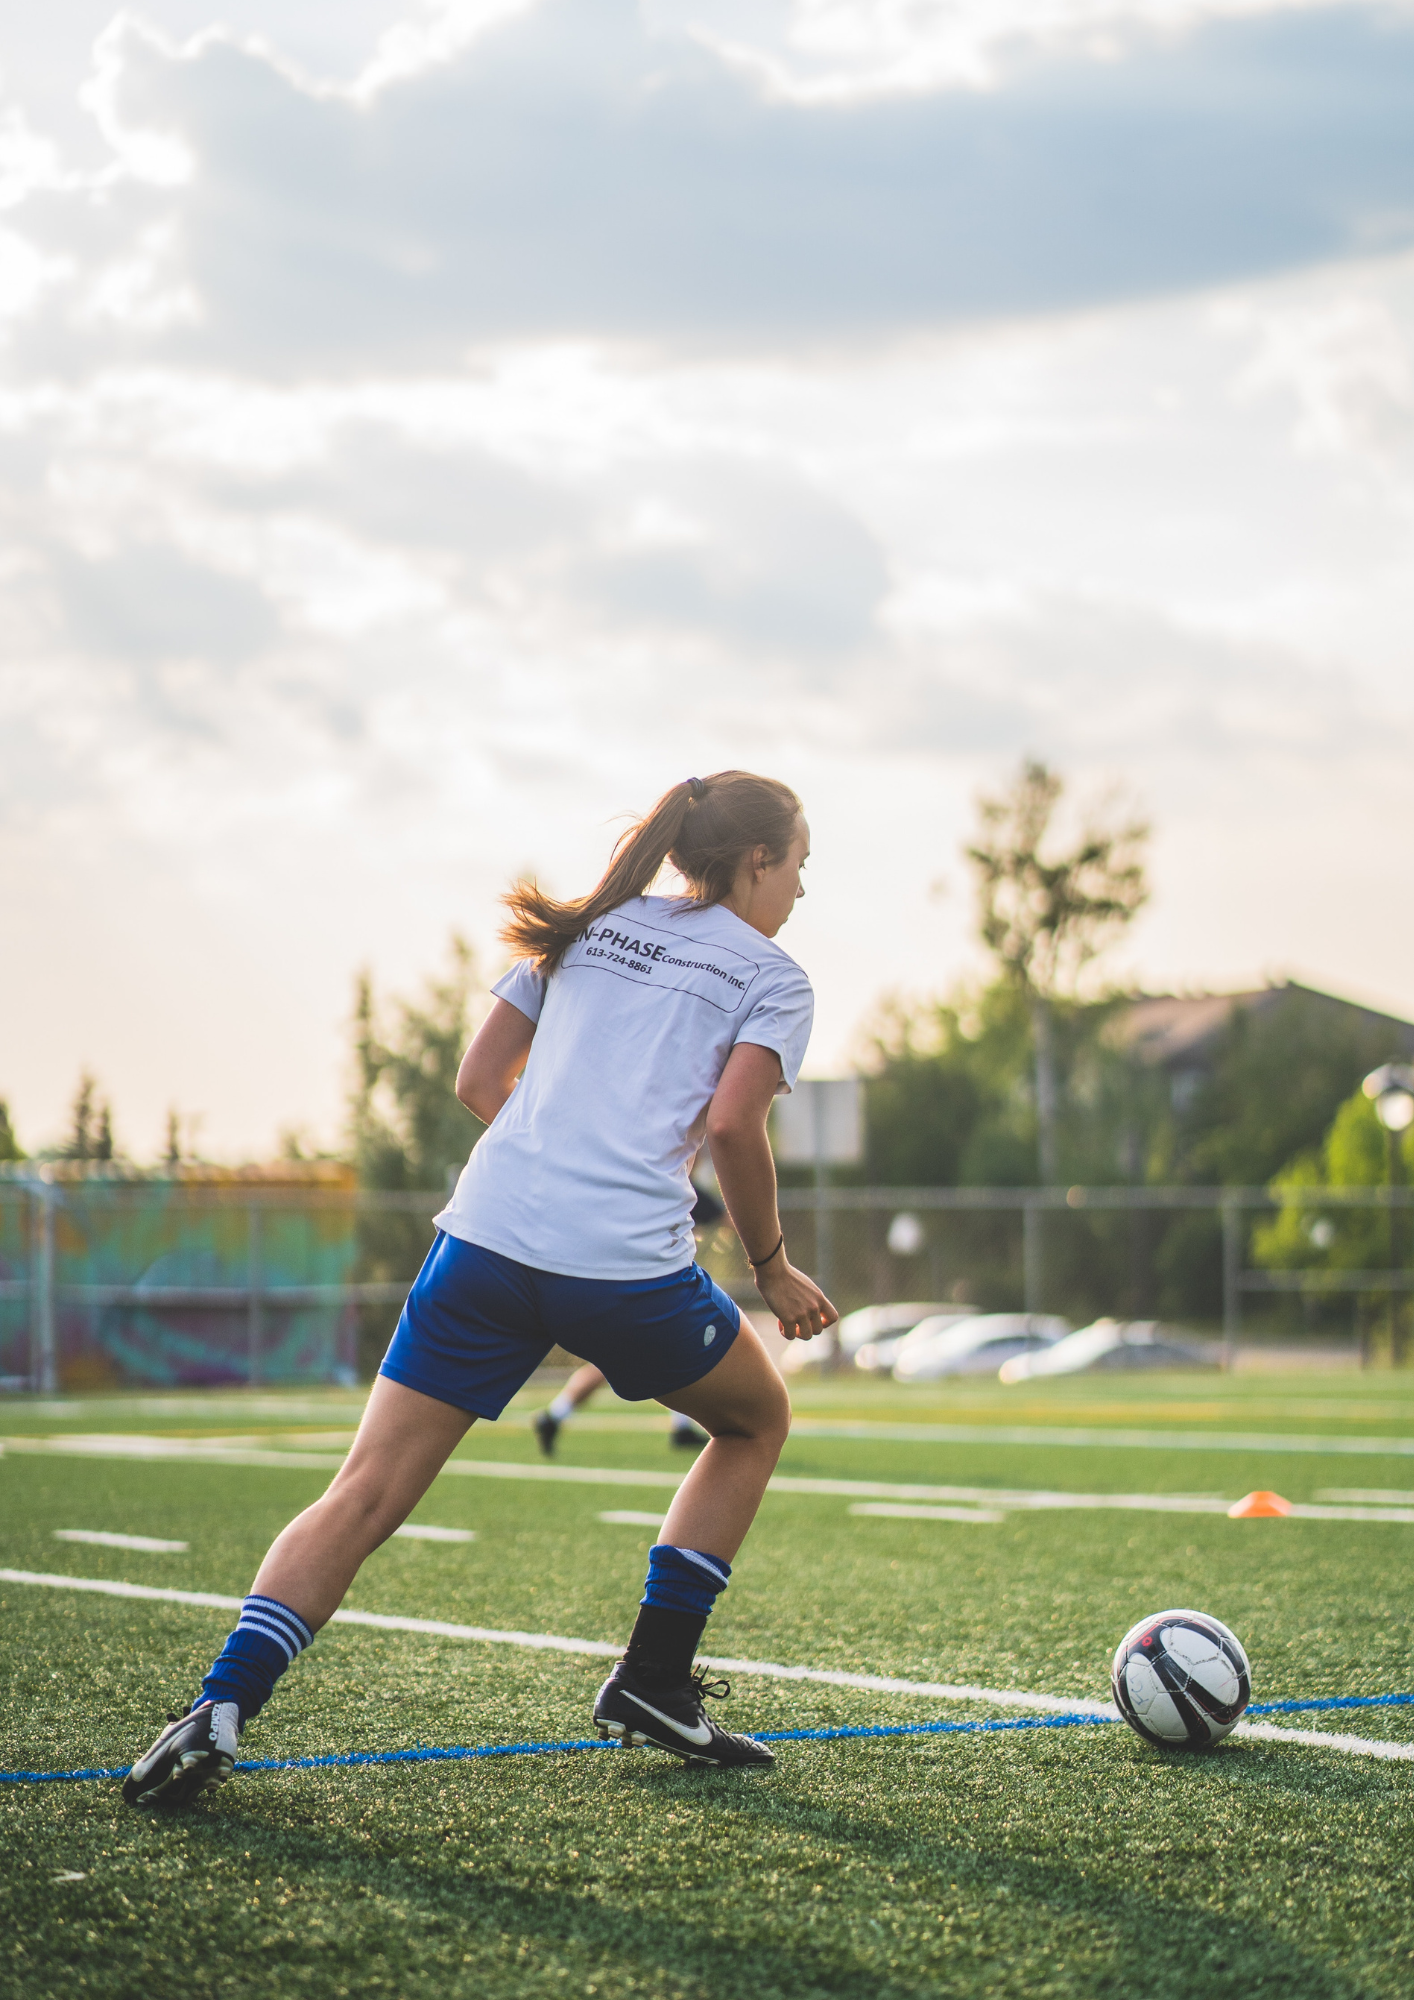 Transformational leadership A qualitative analysis of effective leadership in women’s soccer